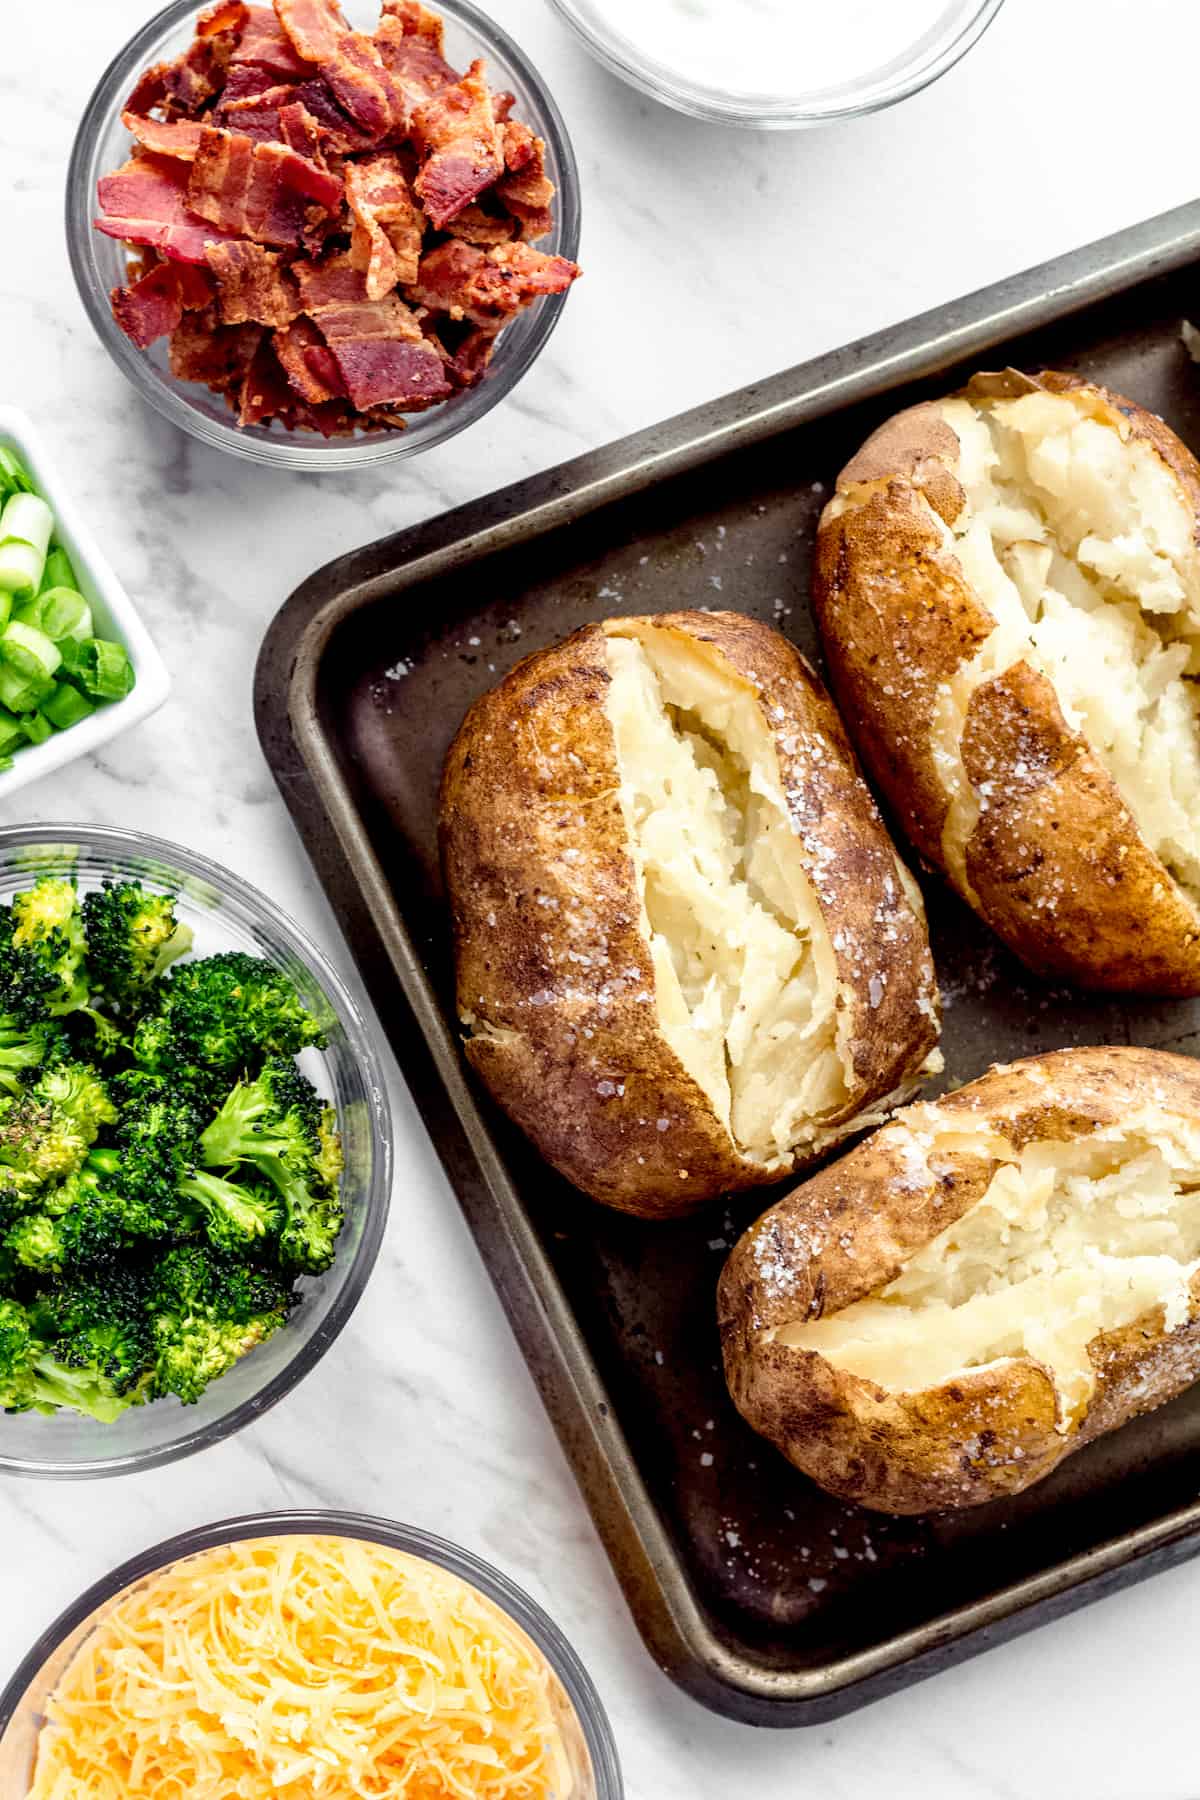 Three Instant Pot Baked Potatoes Beside Bowls of Cheese, Broccoli, Bacon, Chopped Green Onions and Sour Cream